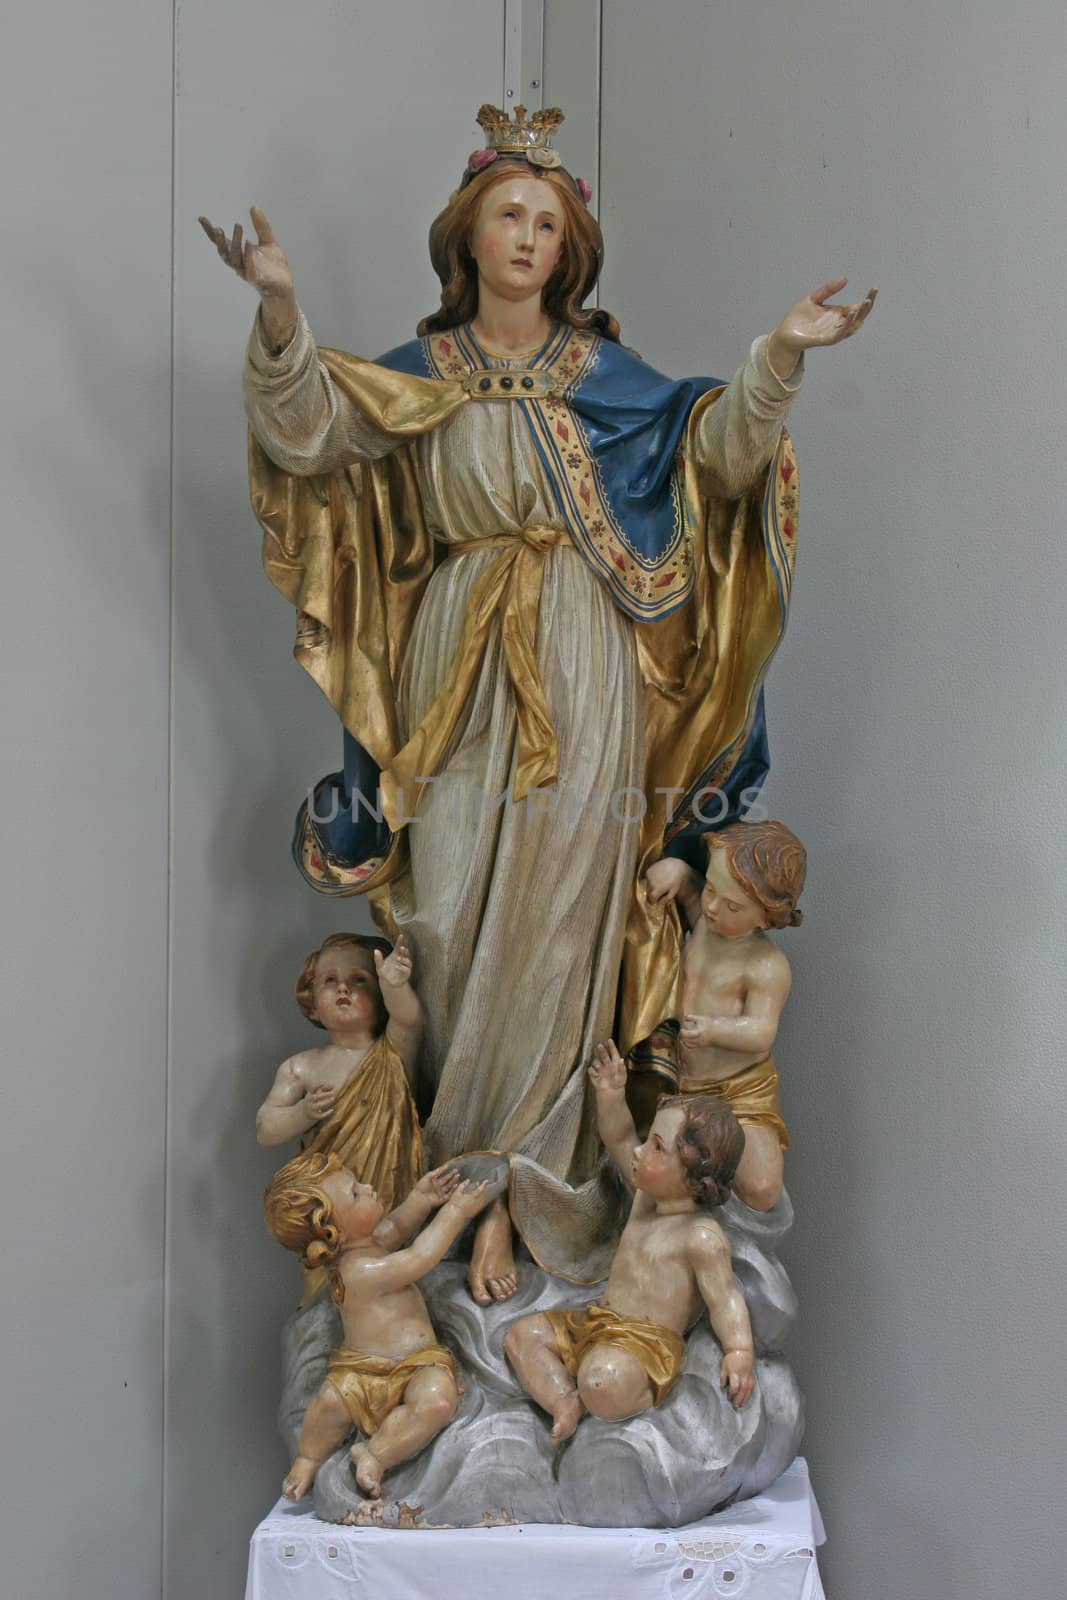 Assumption of the Virgin Mary by atlas